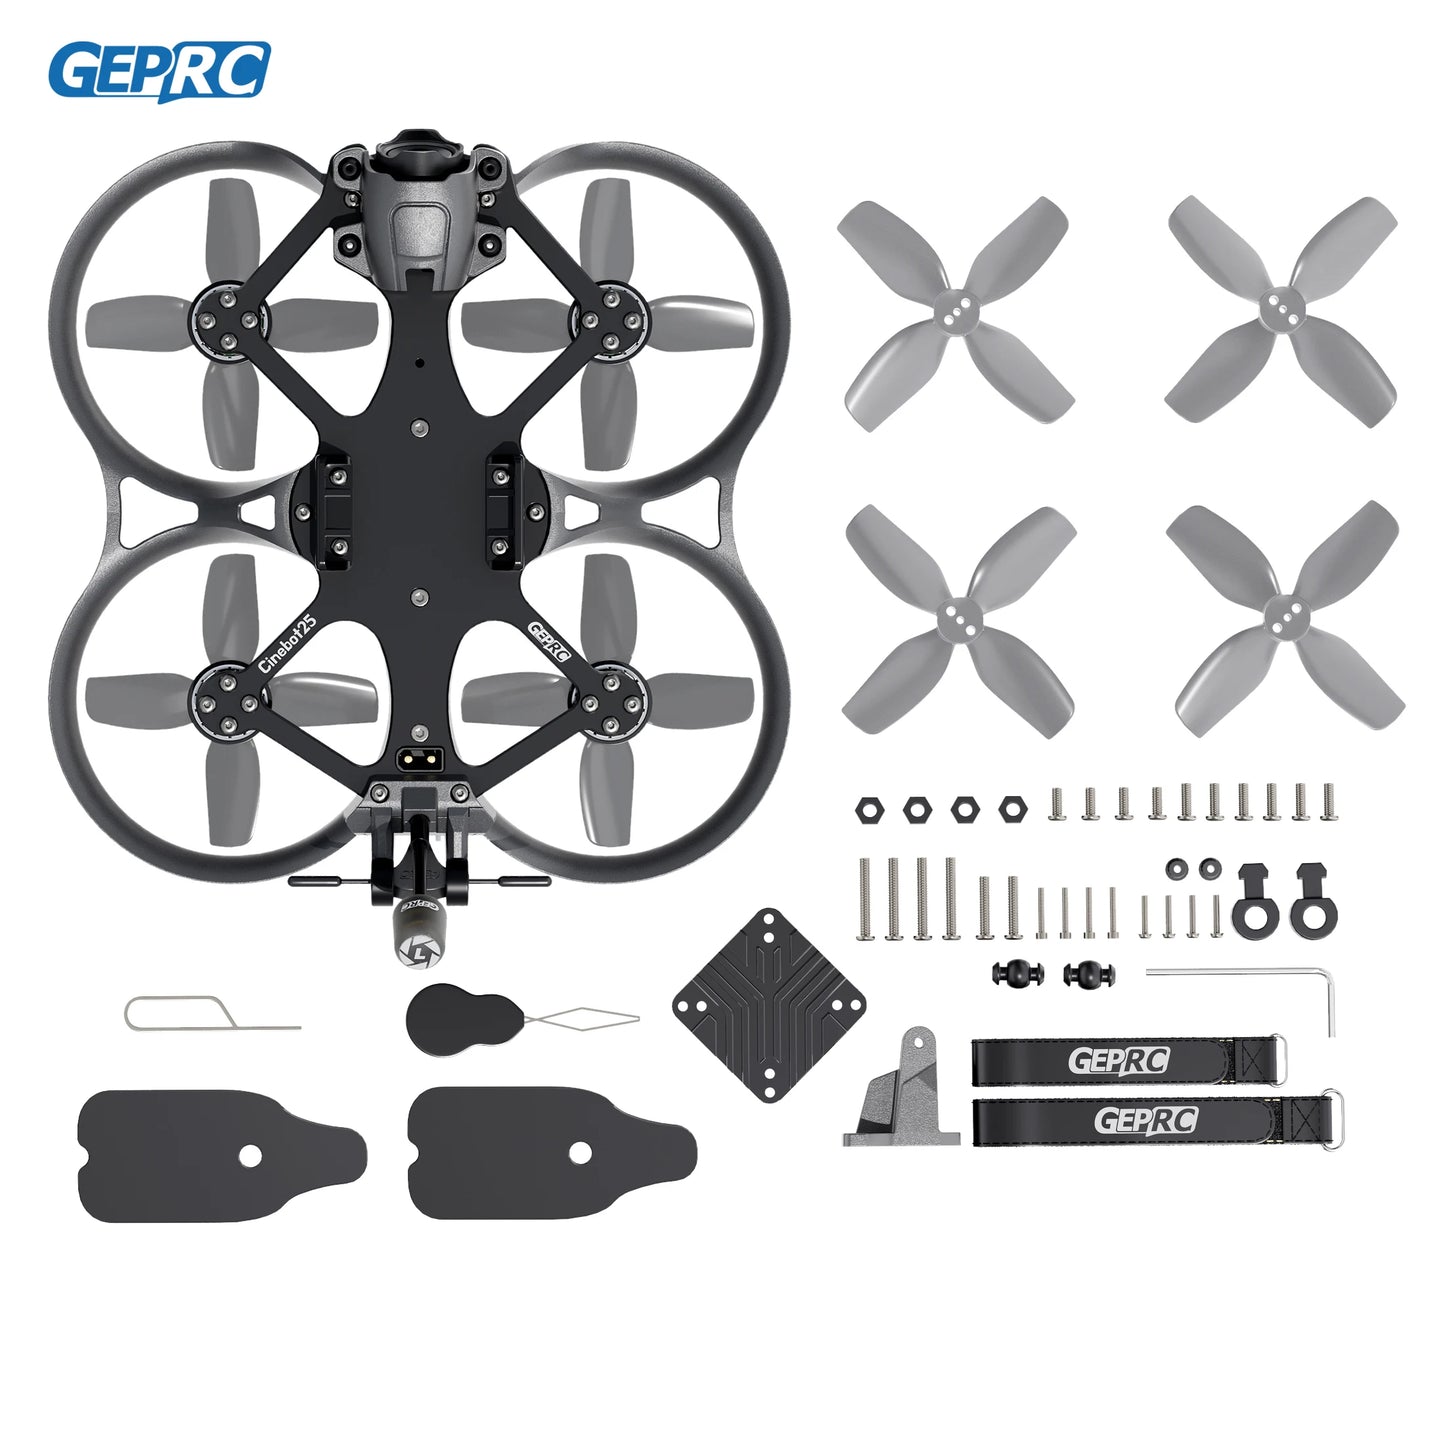 GEPRC Cinebot25 HD Wasp FPV Drone - 2.5inch  RC Racing Freestyle Quadcopter TAKER G4 45A AIO FC Runcam Link VTX Peano 5.8G Antenna